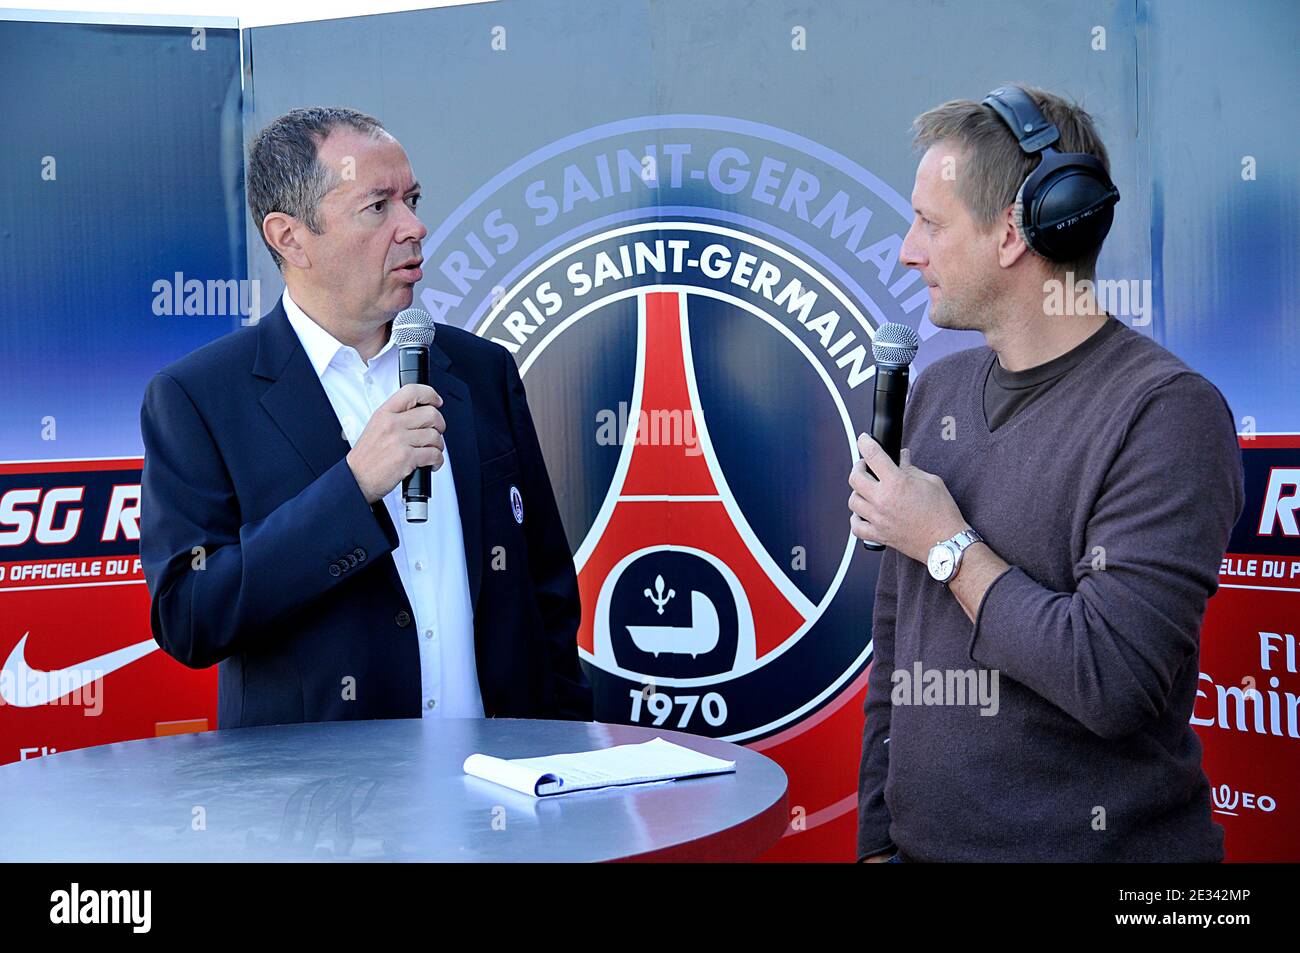 Paris Saint-Germain (PSG) football team president Robin Leproux and French radioman Max attend the launch of PSG radio to 'le Camp des Loges' in Saint-Germain-en-Laye near Paris, France on Wednesday September 22, 2010. Photo by Thierry Plessis/ABACAPRESS.COM Stock Photo